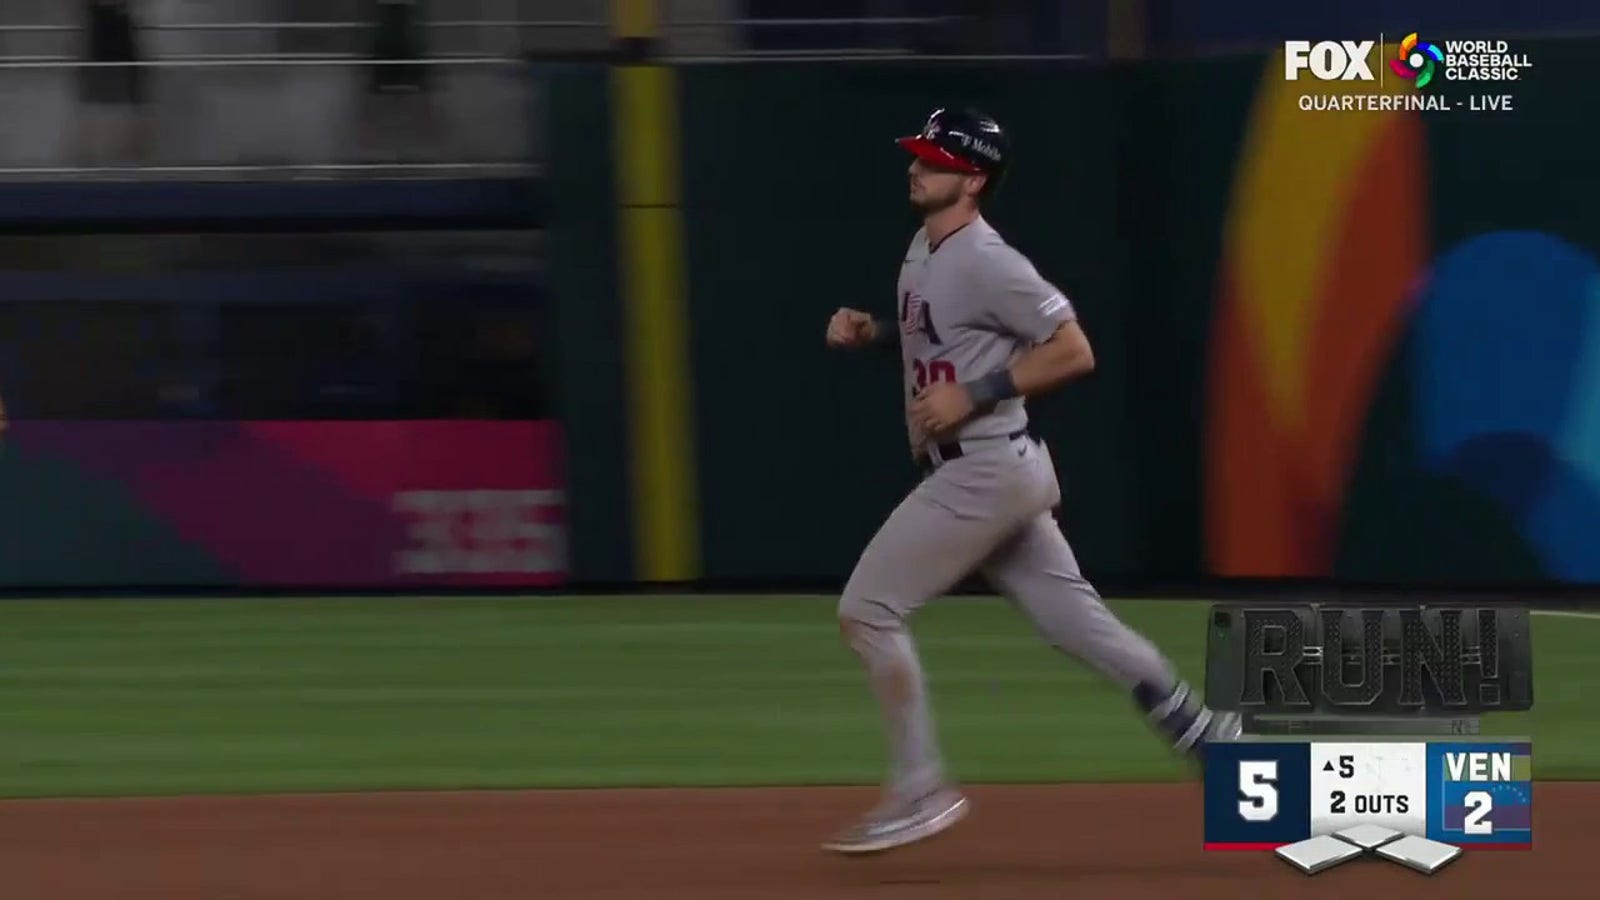 Kyle Tucker launches a solo home run to right, giving the USA a 5-2 lead over Venezuela